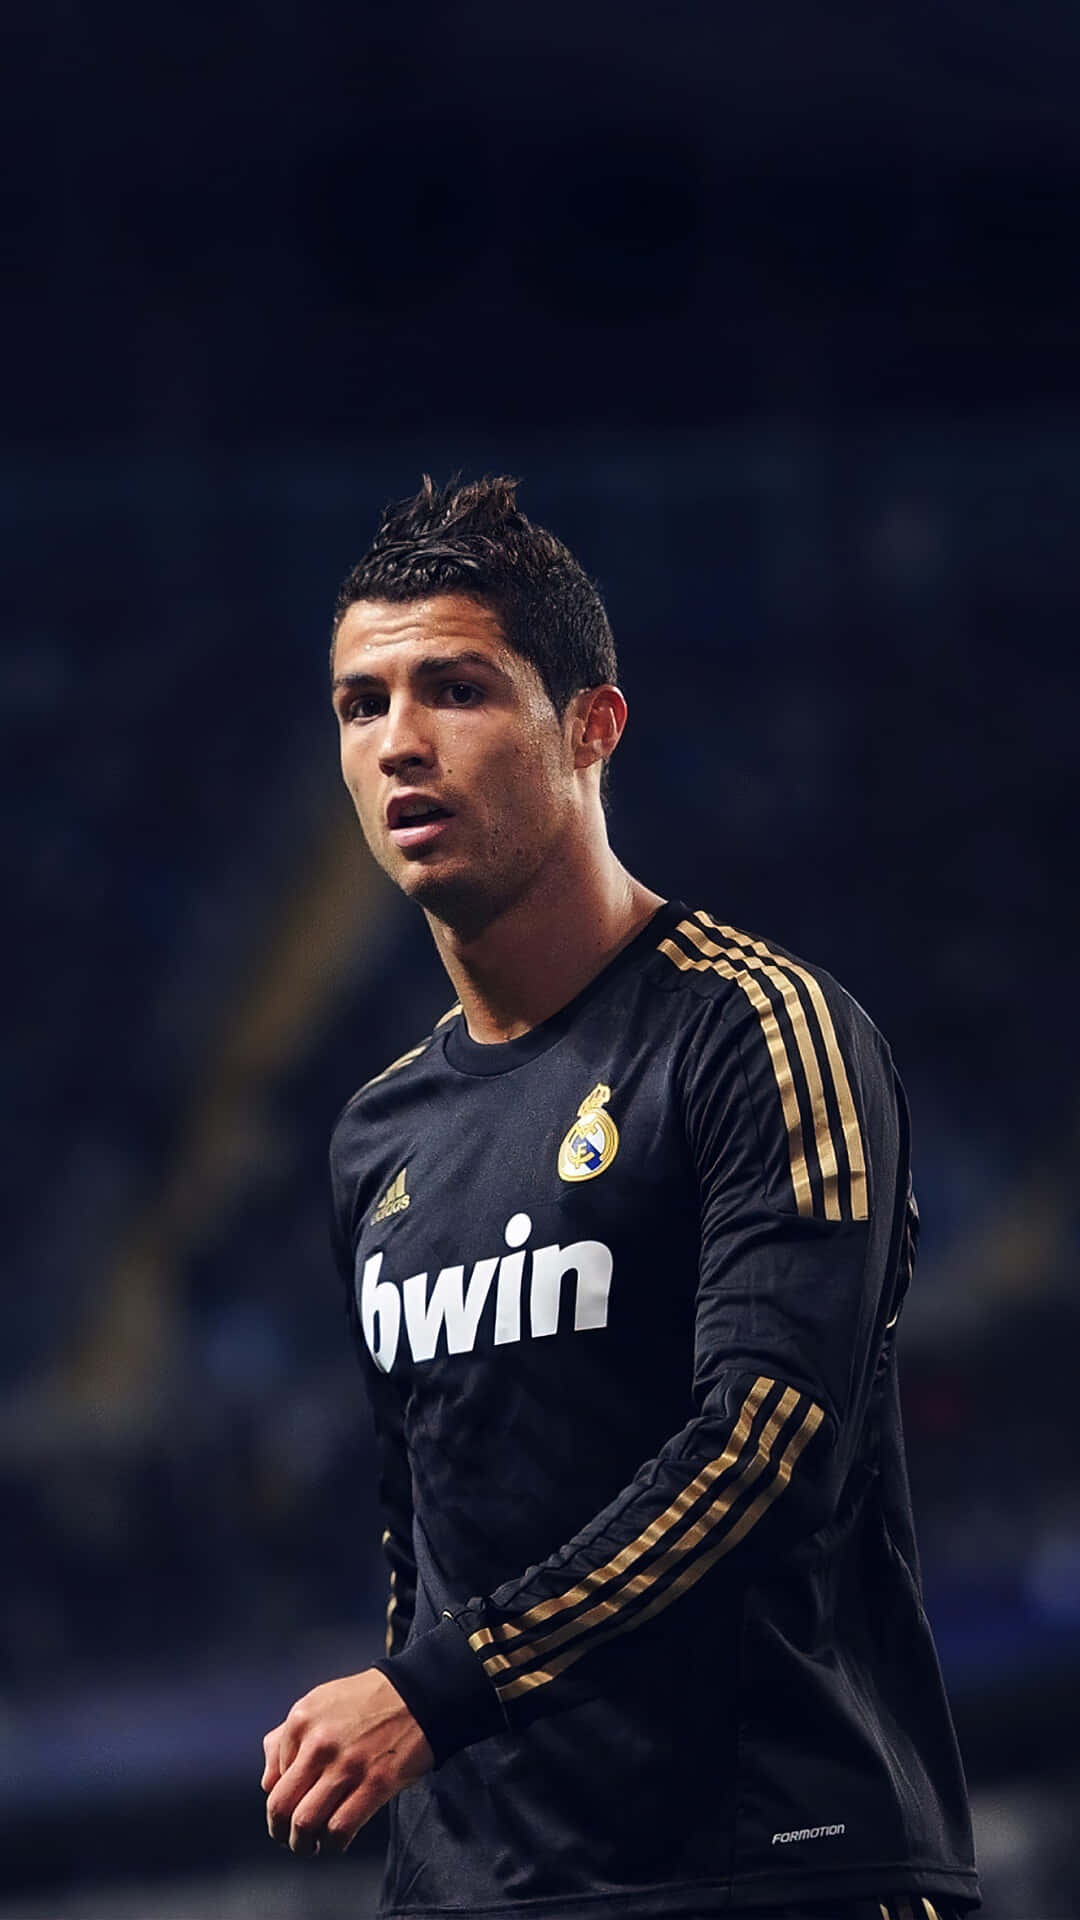 Cristiano Ronaldo kicking the ball with intense concentration Wallpaper